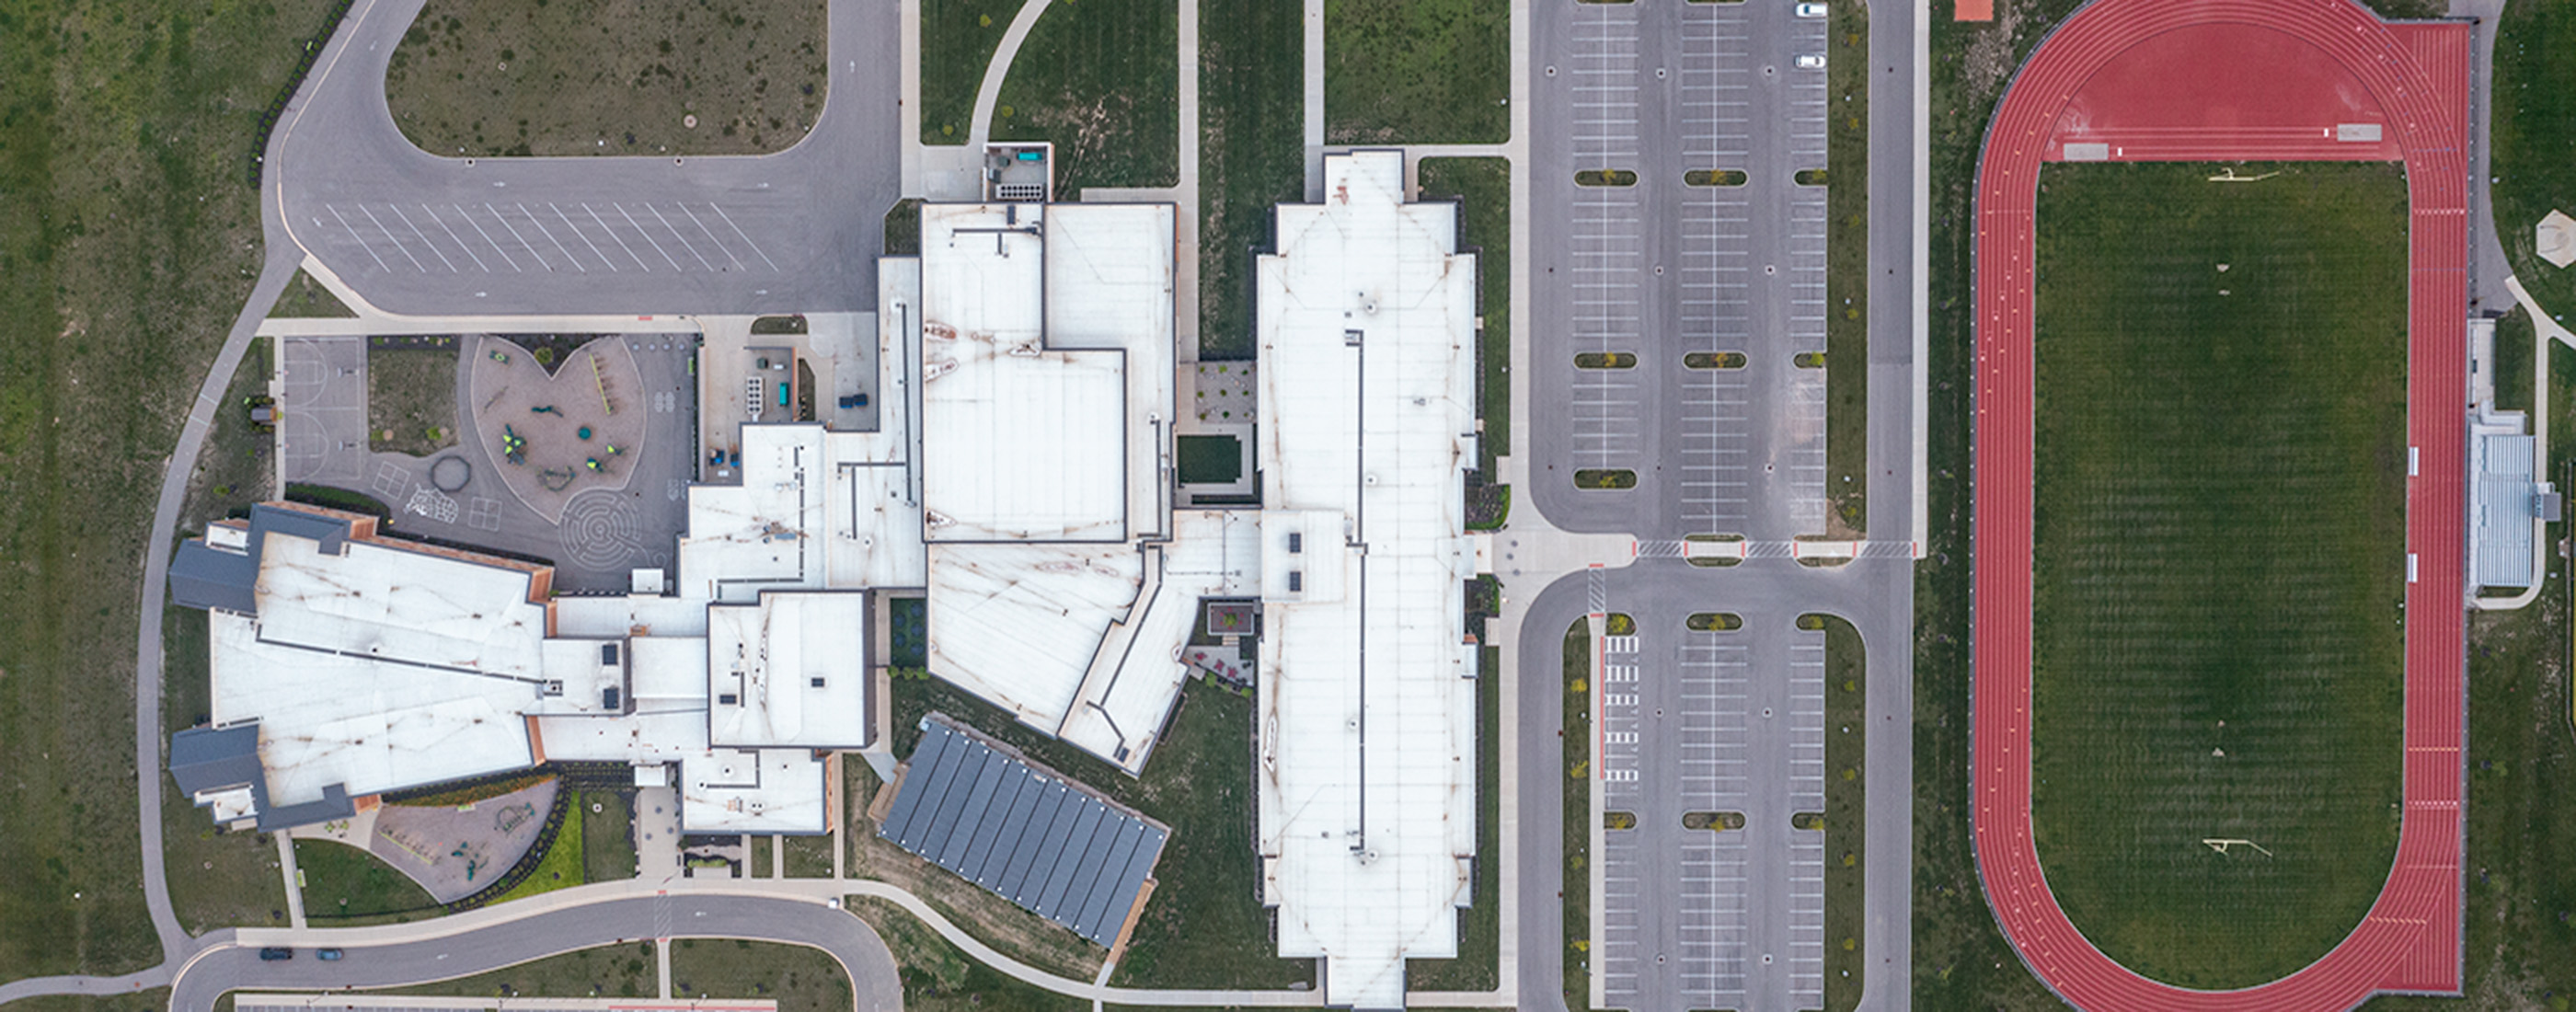 Aerial view of the Dublin campus of Eversole Run and Abraham Depp schools